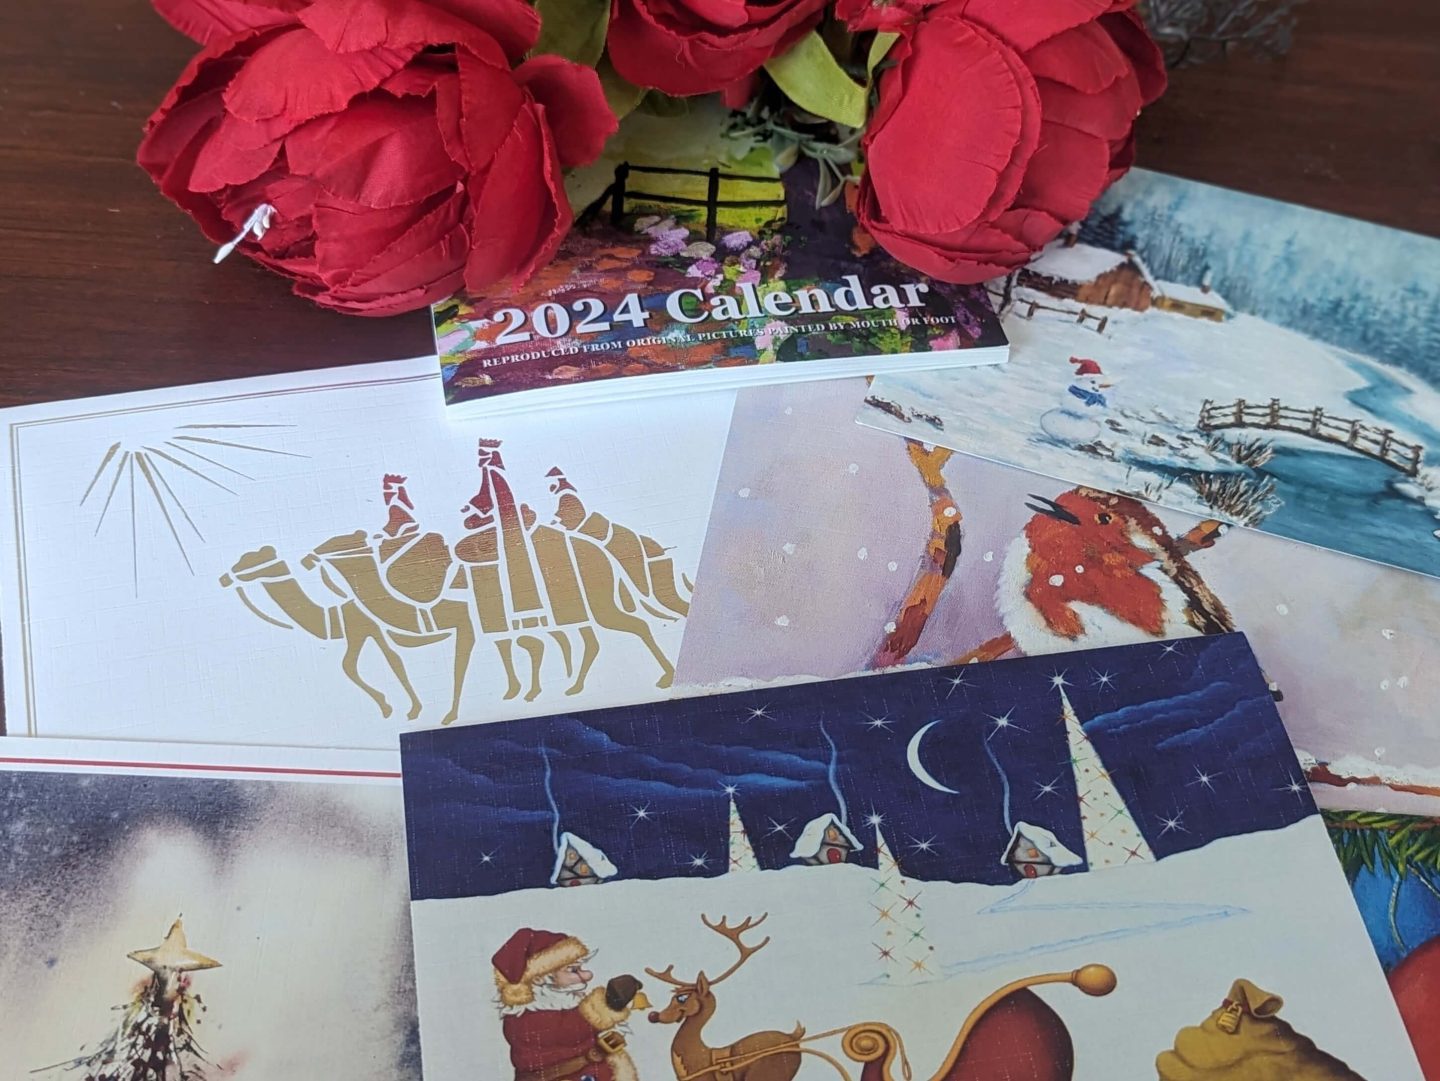 Christmas cards and a 2024 calendar from MFPA UK